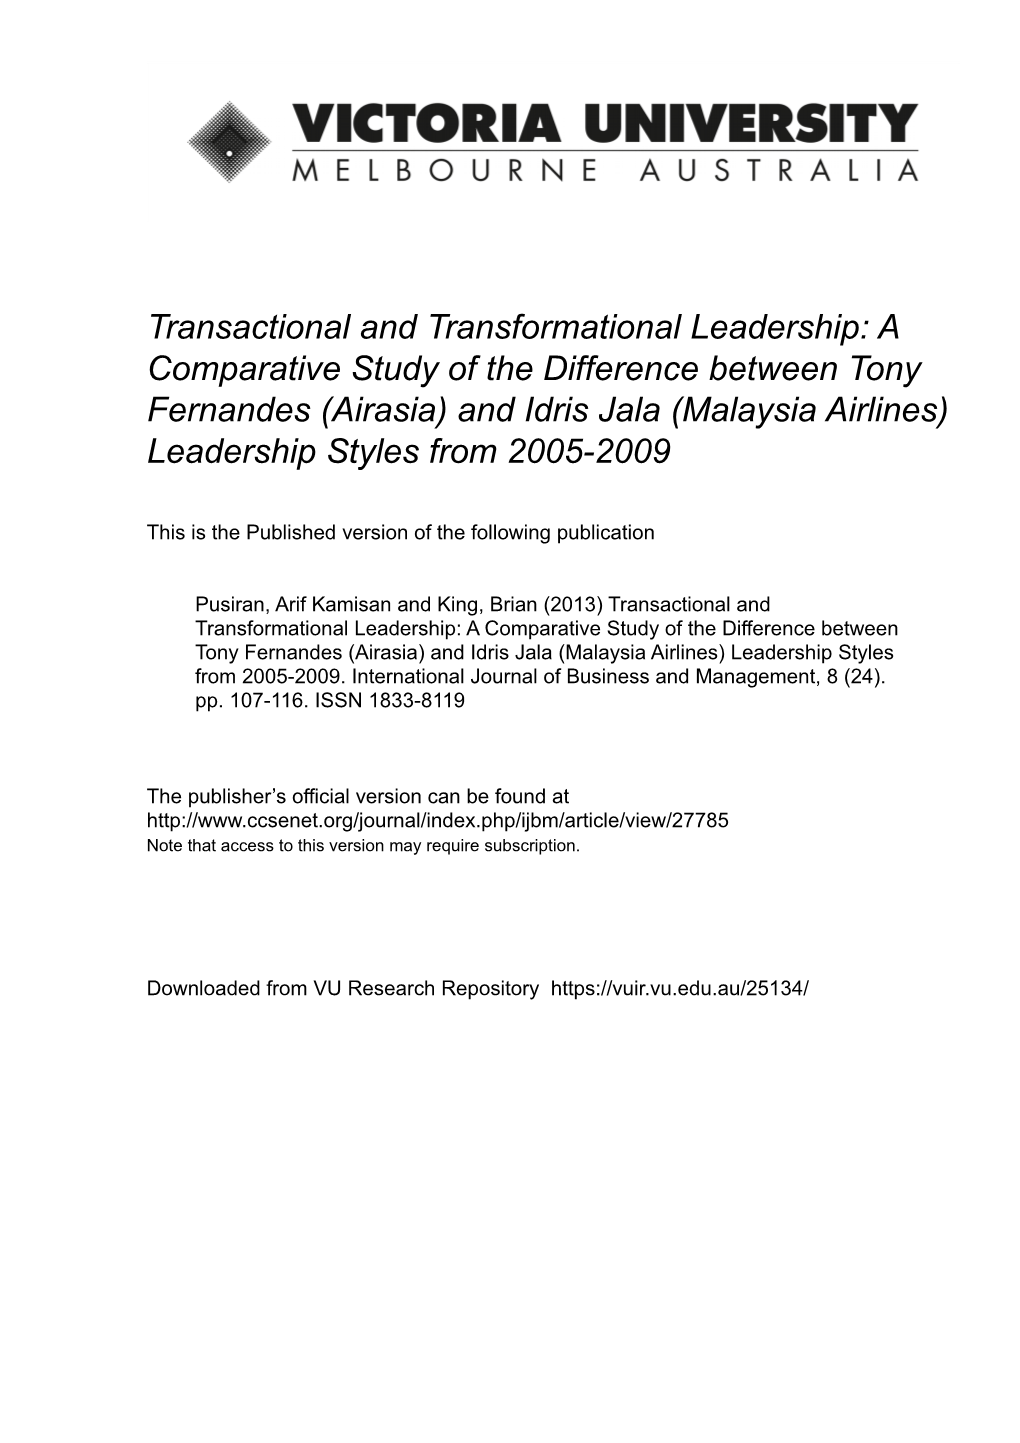 Transactional and Transformational Leadership: a Comparative Study of the Difference Between Tony Fernandes (Airasia) and Idris